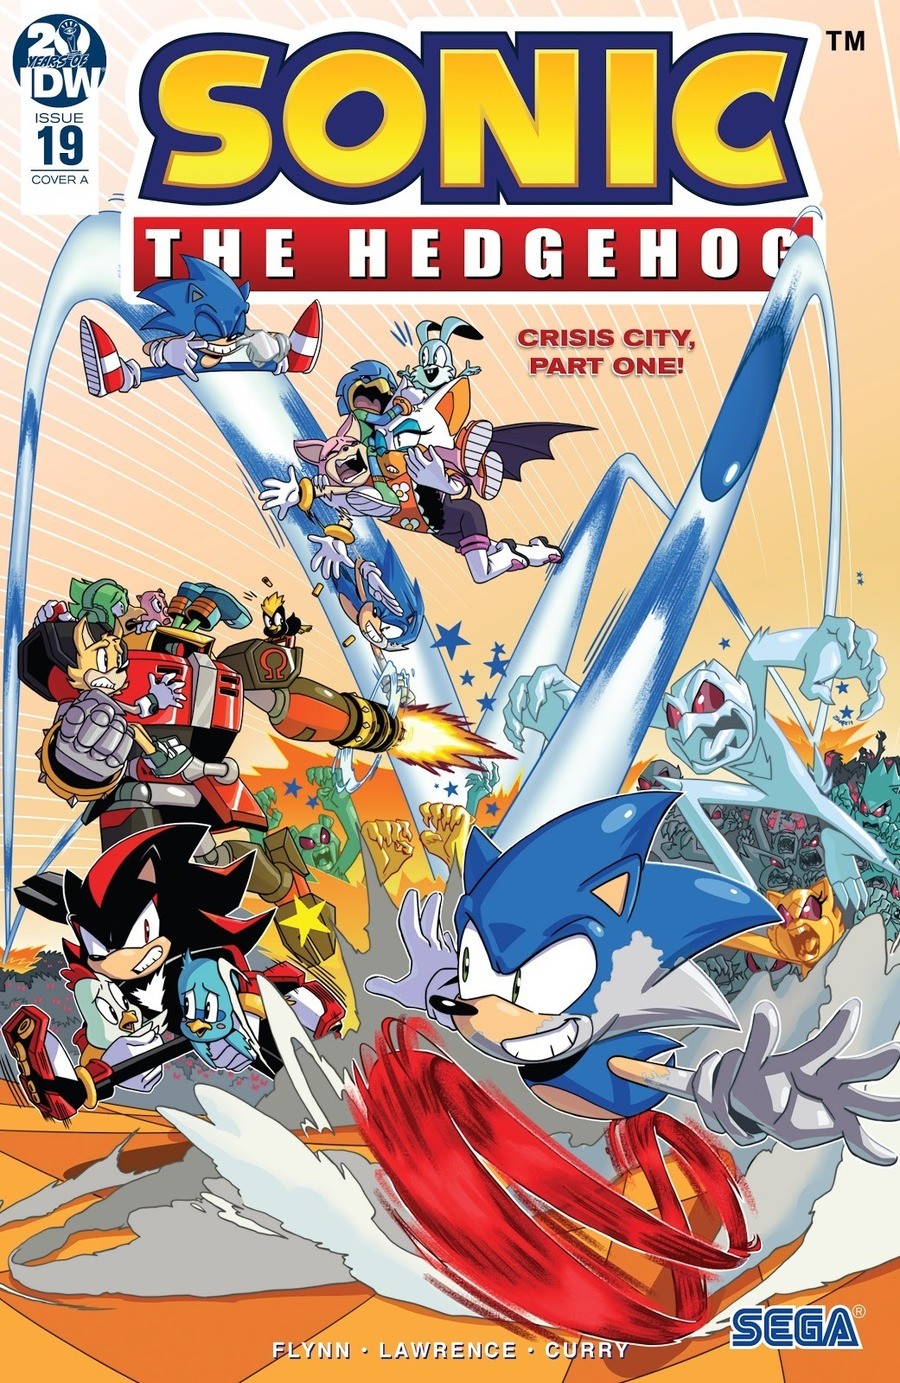 Sonic IDW #19. join list: SonicIDW (93 subs)Mention History Isn't crisis city that one level from sonic 06?. To be fair, Shadow can be an arrogant ass sometimes. Though I still would've liked the sacrifice angle better.